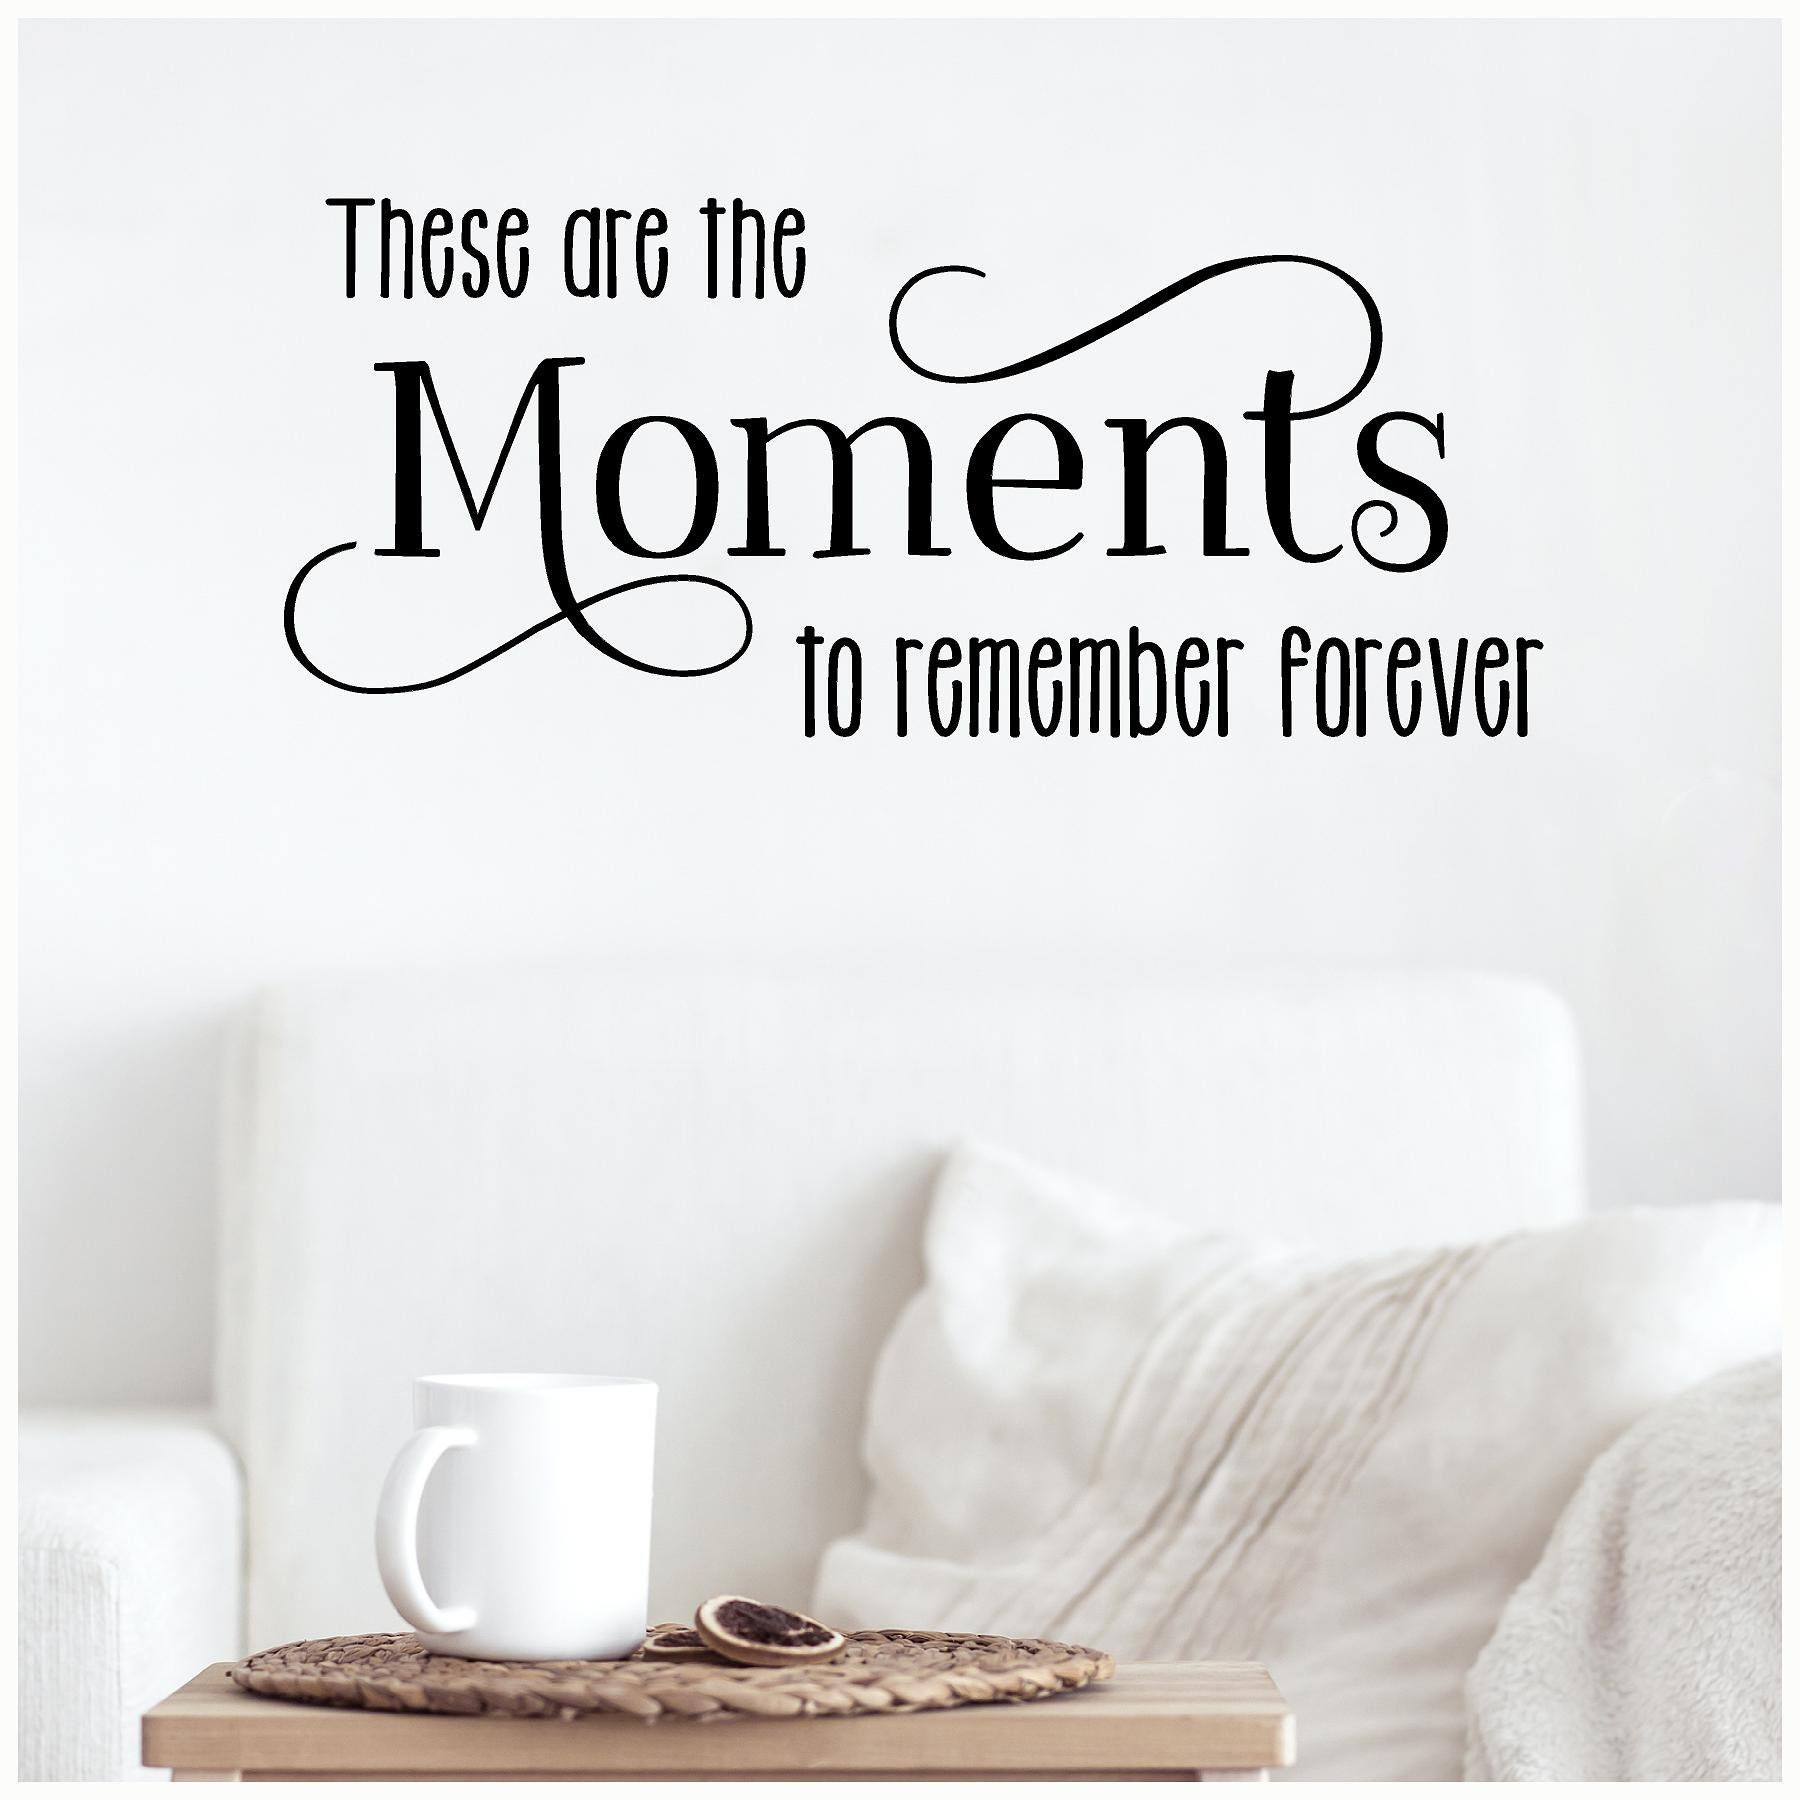 These Are The Moments To Remember Forever Vinyl Lettering Wall Saying Decal Sticker Self Adhesive Art